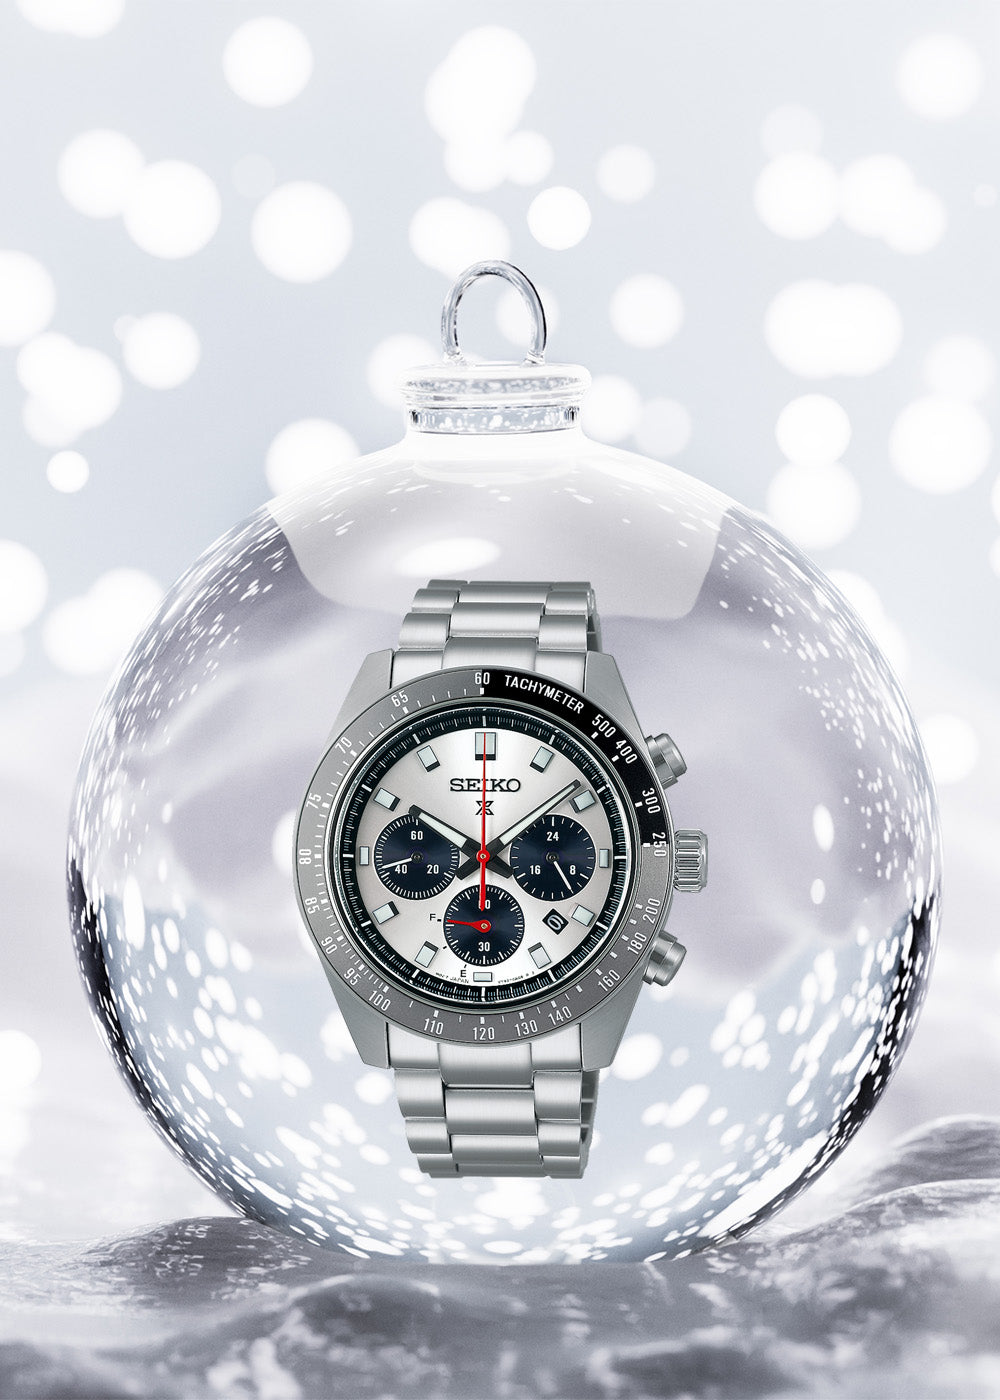 Seiko Prospex Speedtimer “Go Large” Solar Chronograph, White Dial with Stainless Steel Bracelet in Bauble on Snow Background